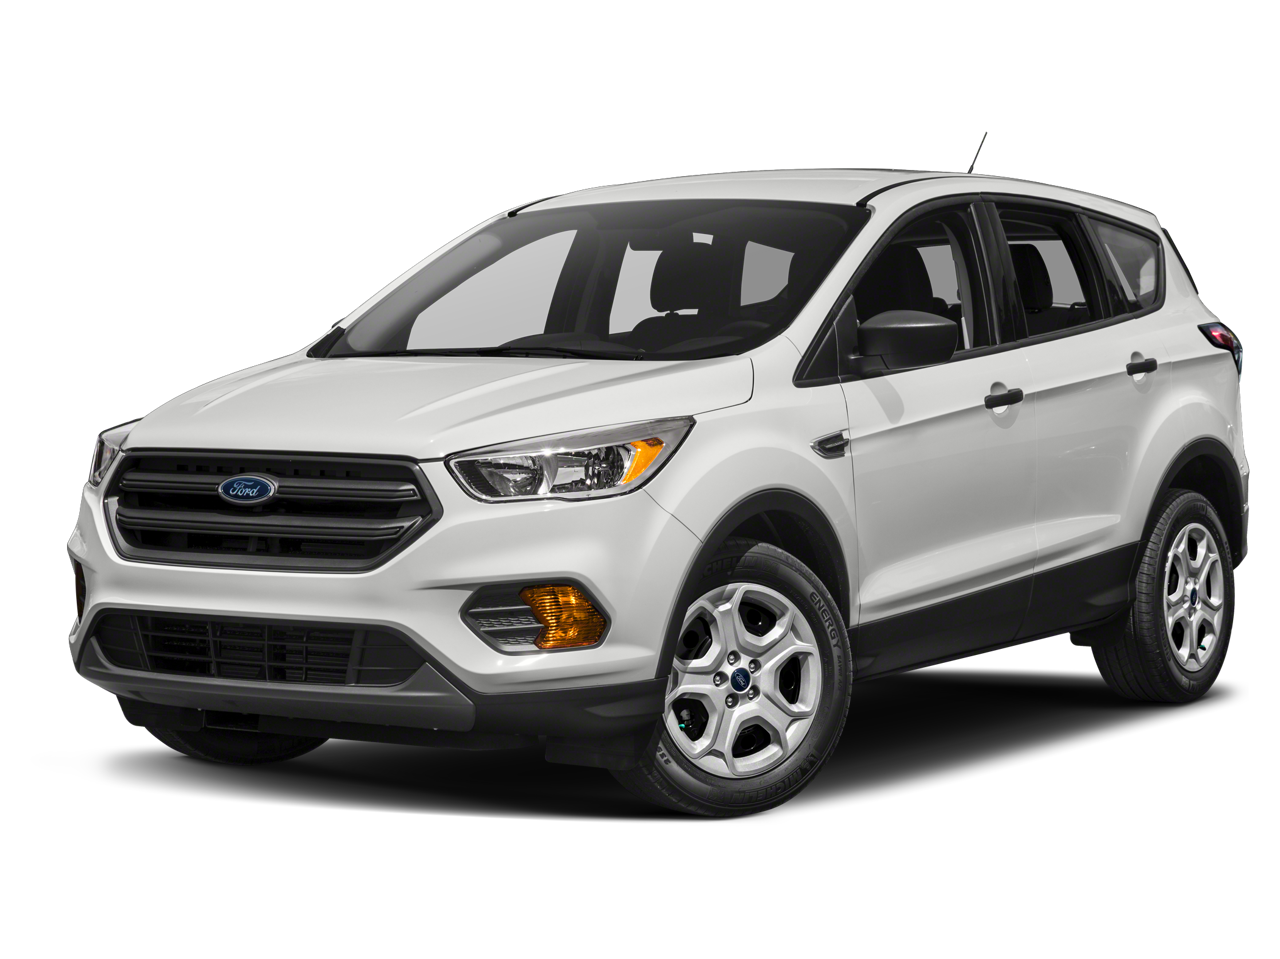 Used 2019 Ford Escape SE with VIN 1FMCU0GD6KUC27338 for sale in Mankato, Minnesota